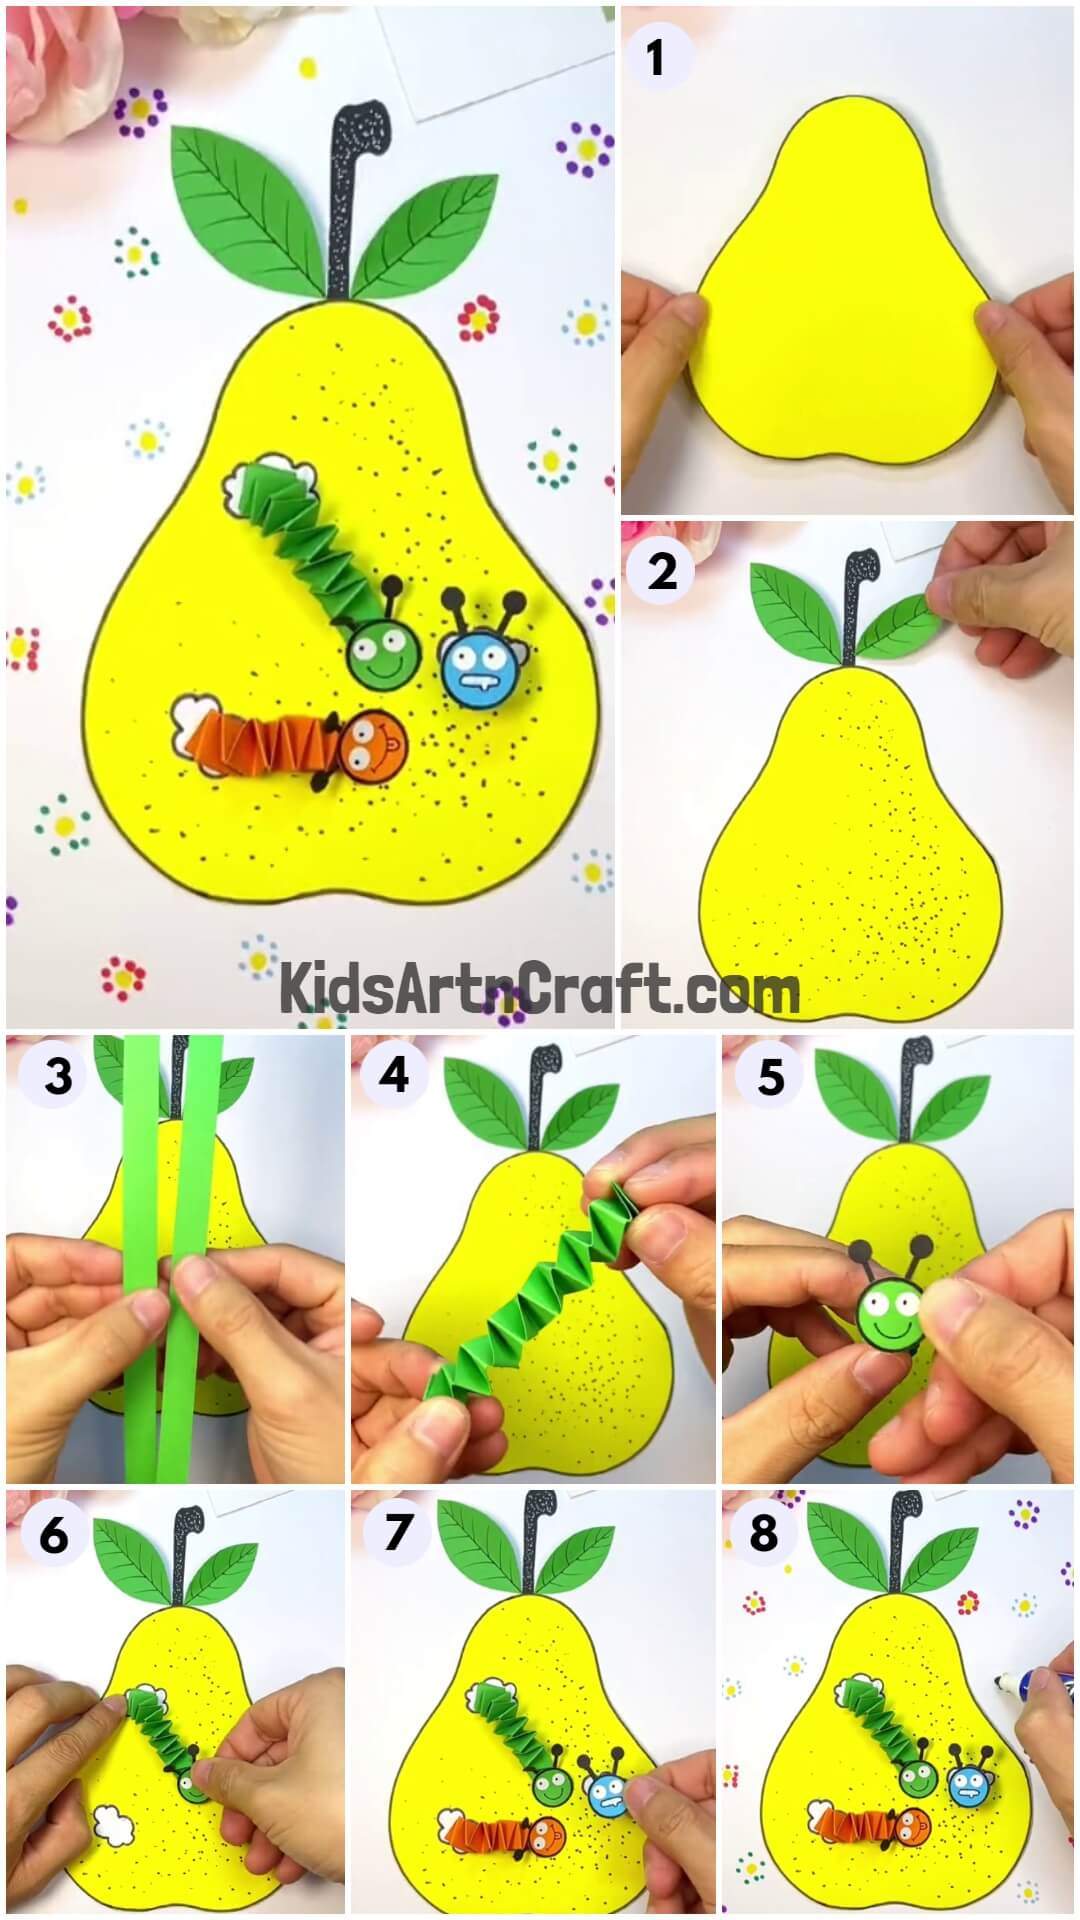  Easy To Make Pear-Fruit Worm Craft Tutorial For Kids